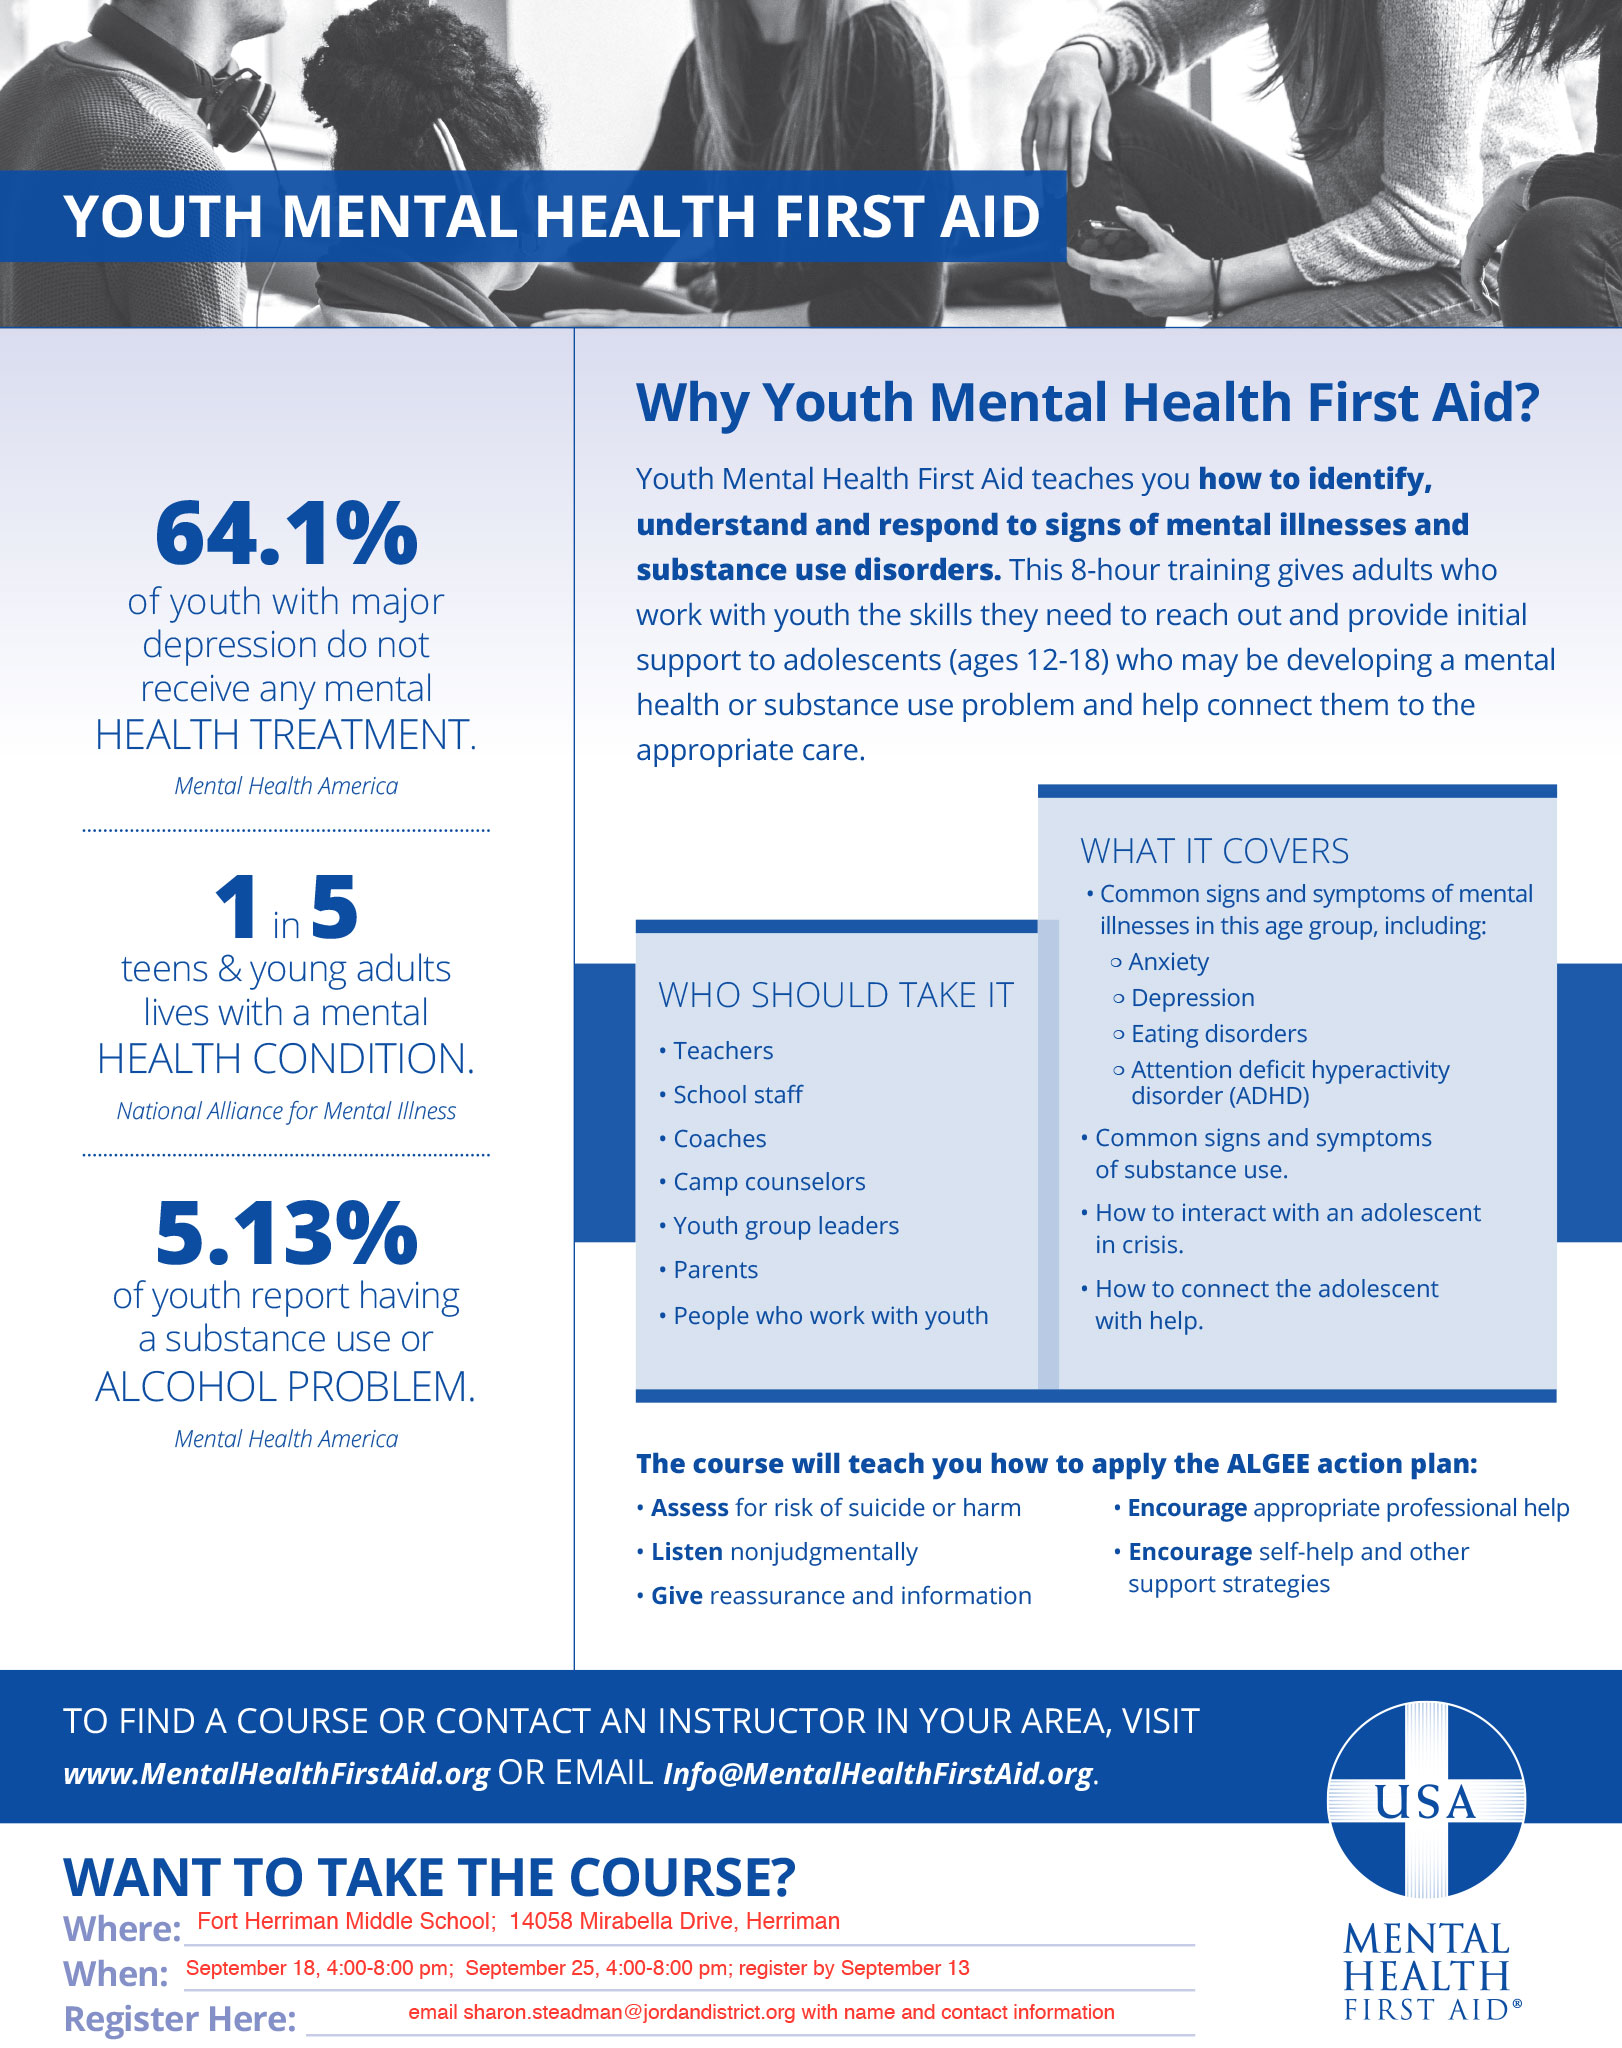 Youth Mental First Aid Course Information